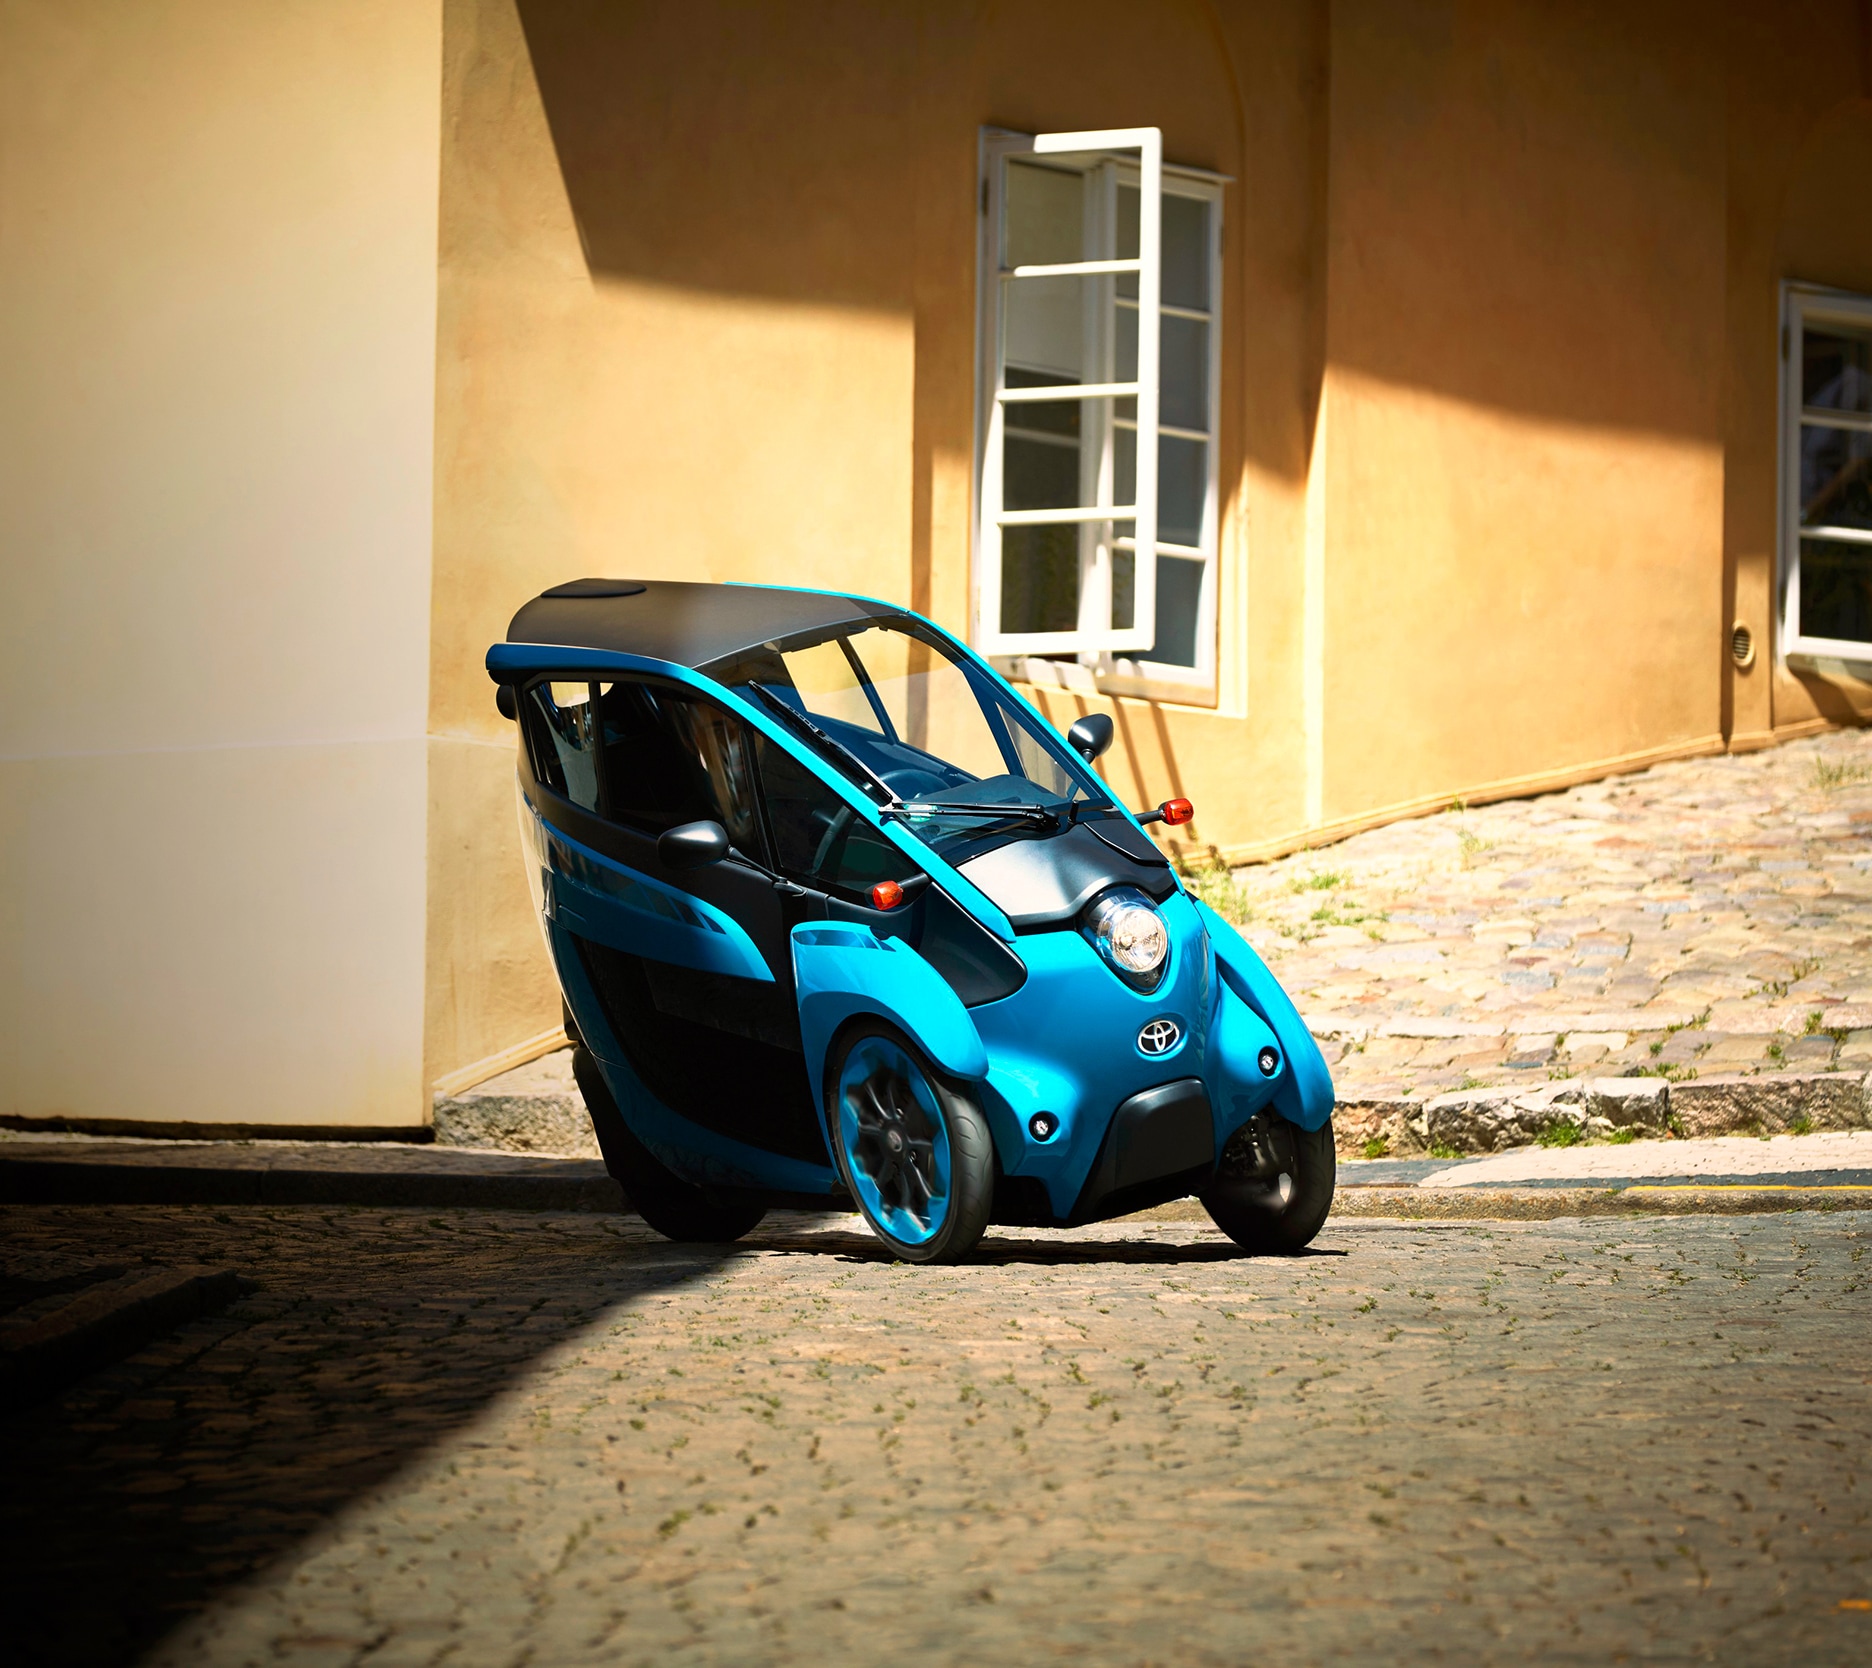 Blue Toyota i-ROAD Personal Mobility Vehicle (PMV) parked on a cobblestone street.